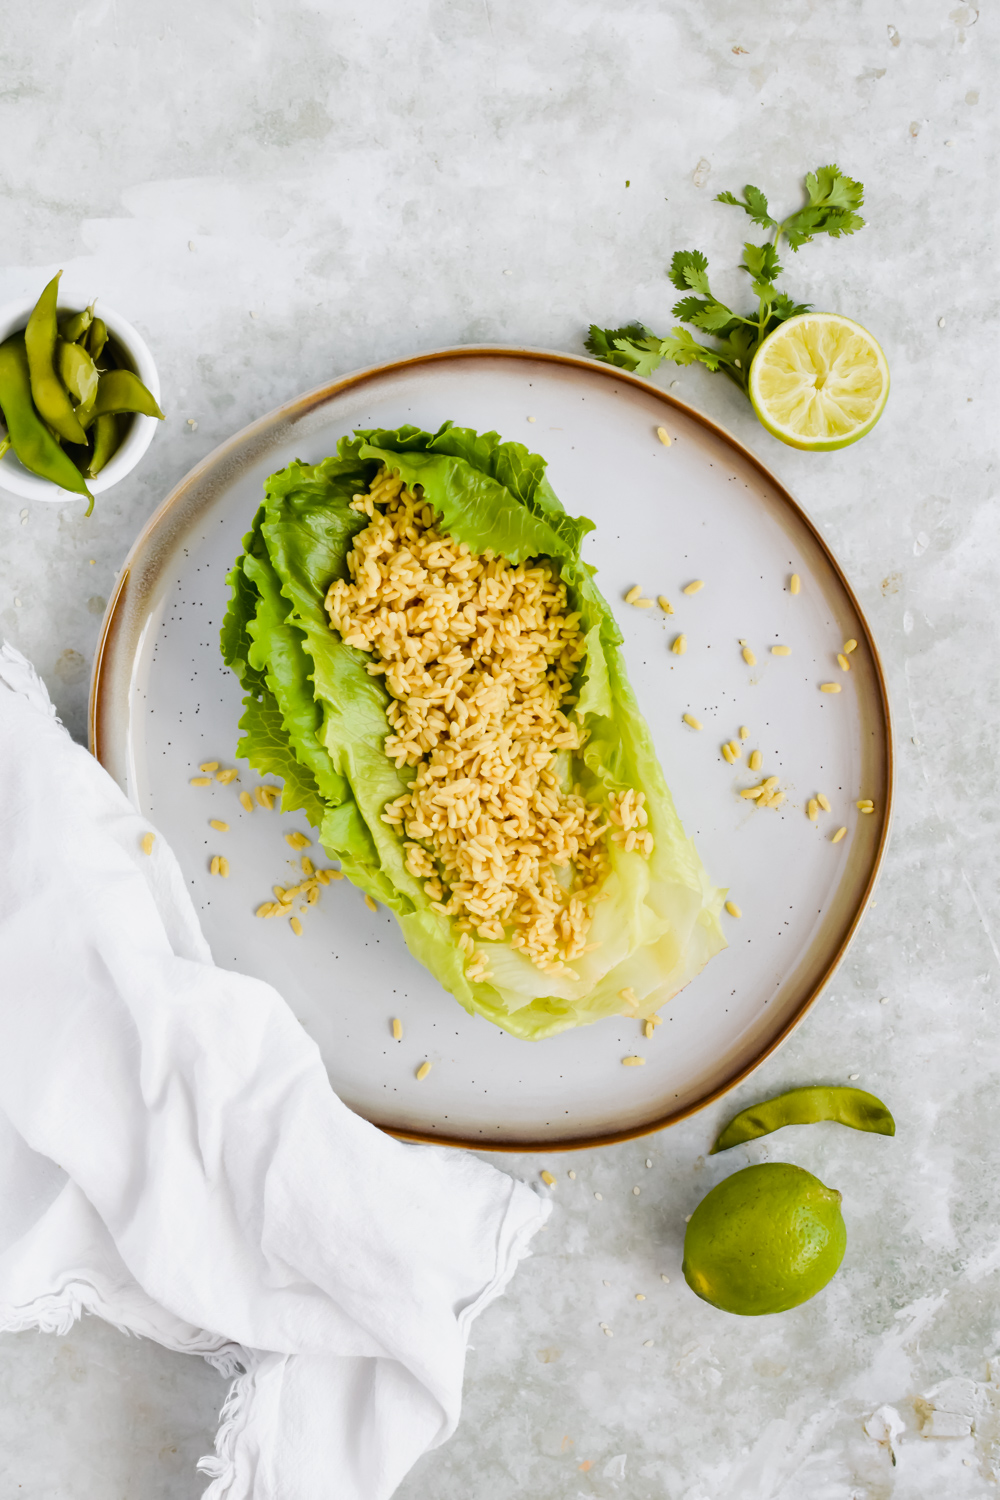 two large slices of romaine lettuce filled with right rice on white plate on gray background.